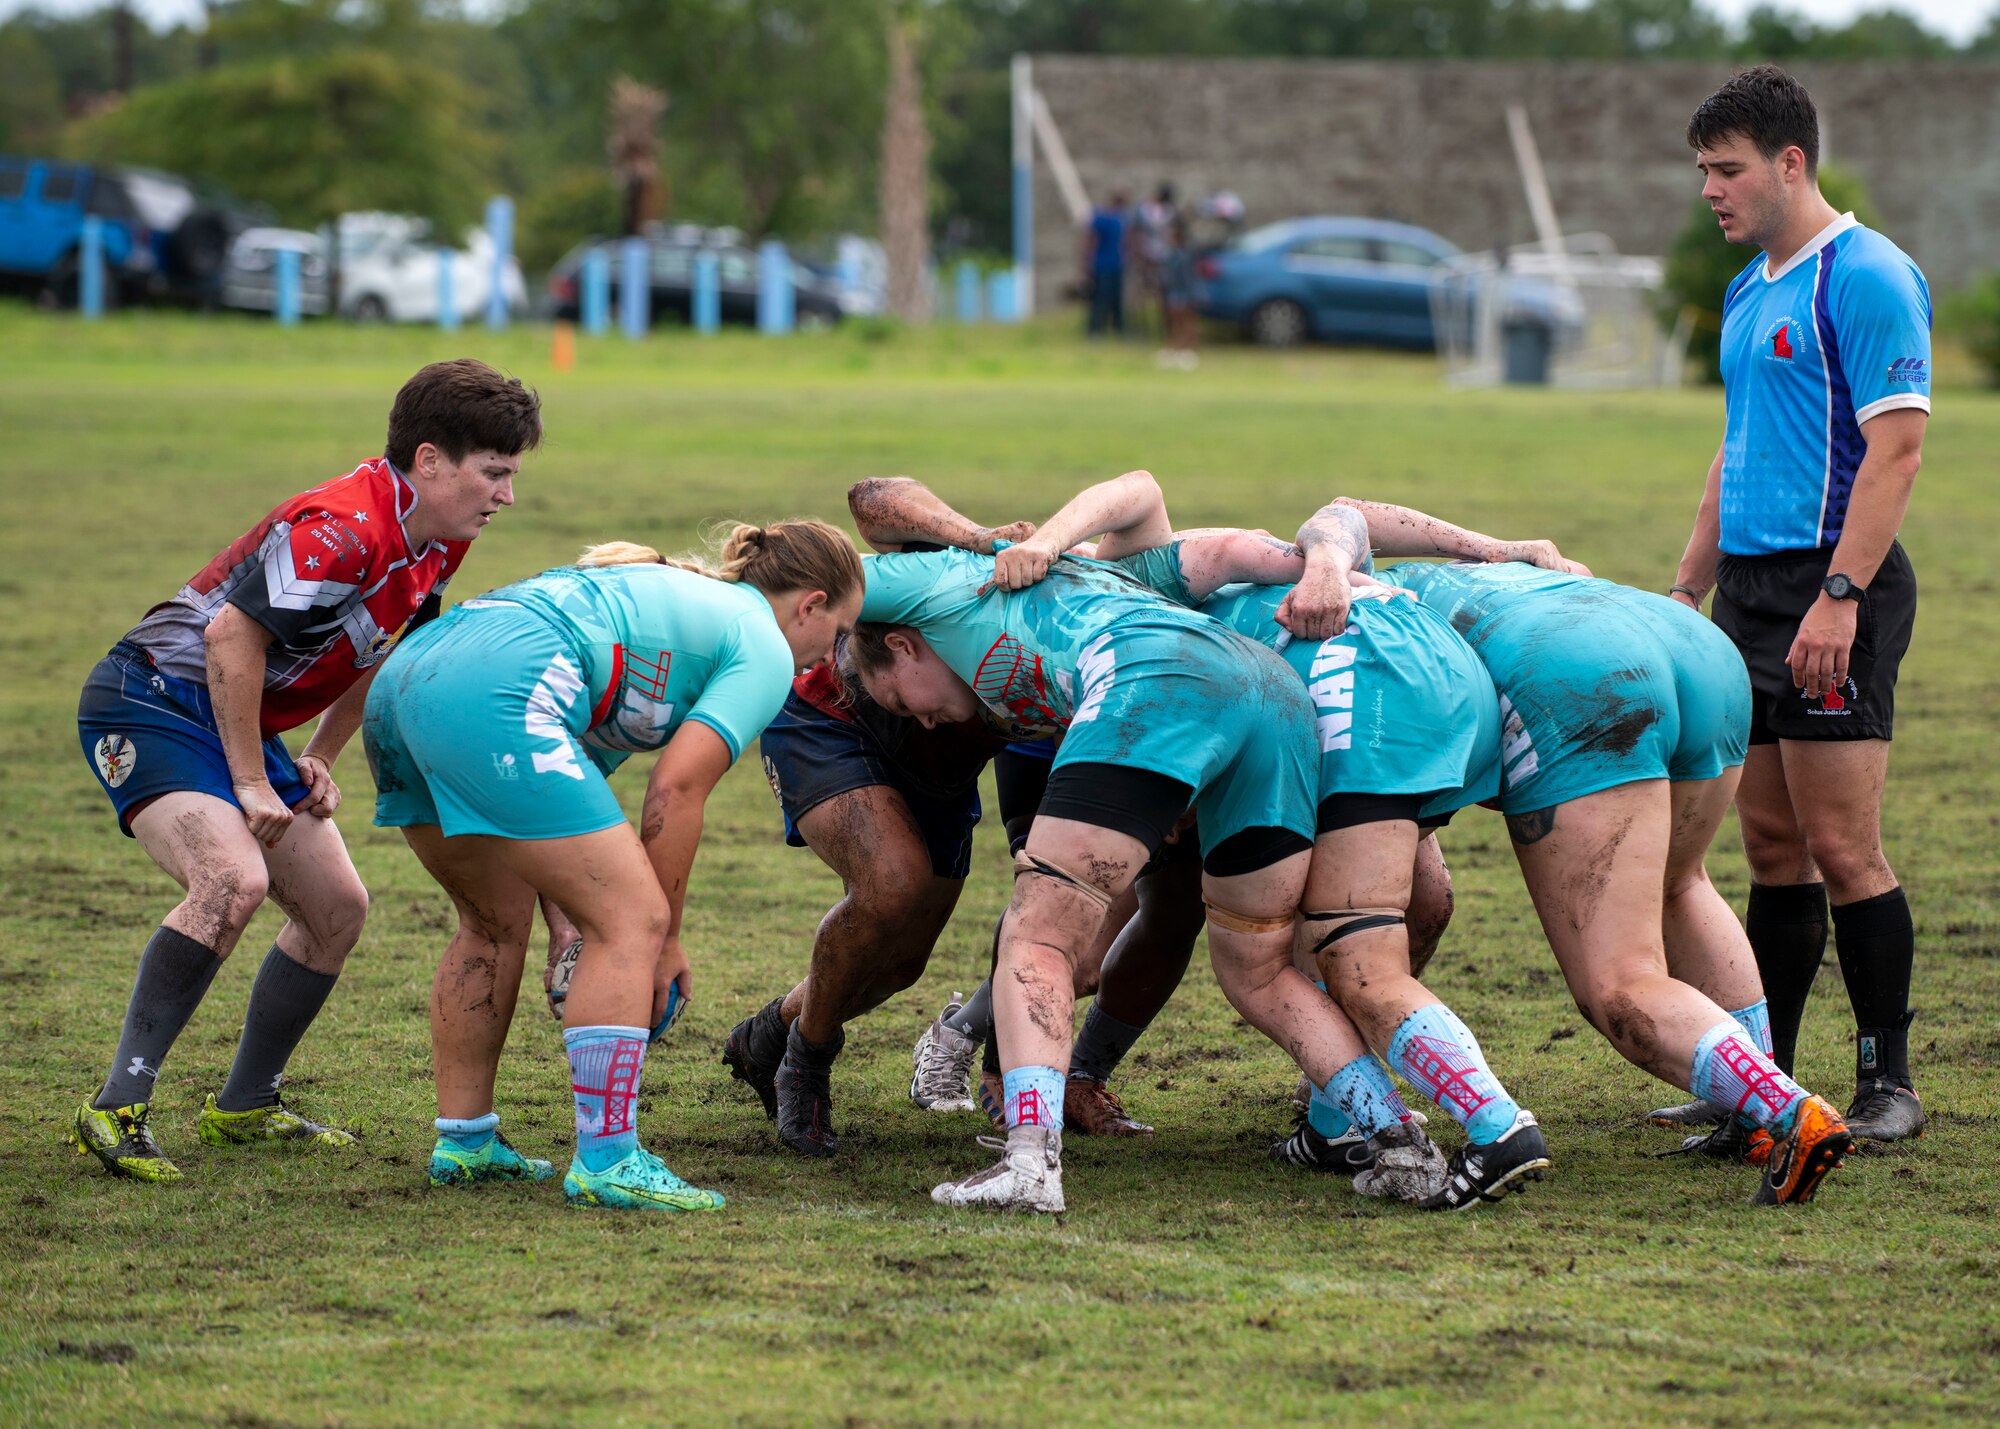 United States Air Force and Navy rugby player form a scrum at the Annual Armed Forces Women’s Rugby Championship in Wilmington, North Carolina, June 26, 2021.